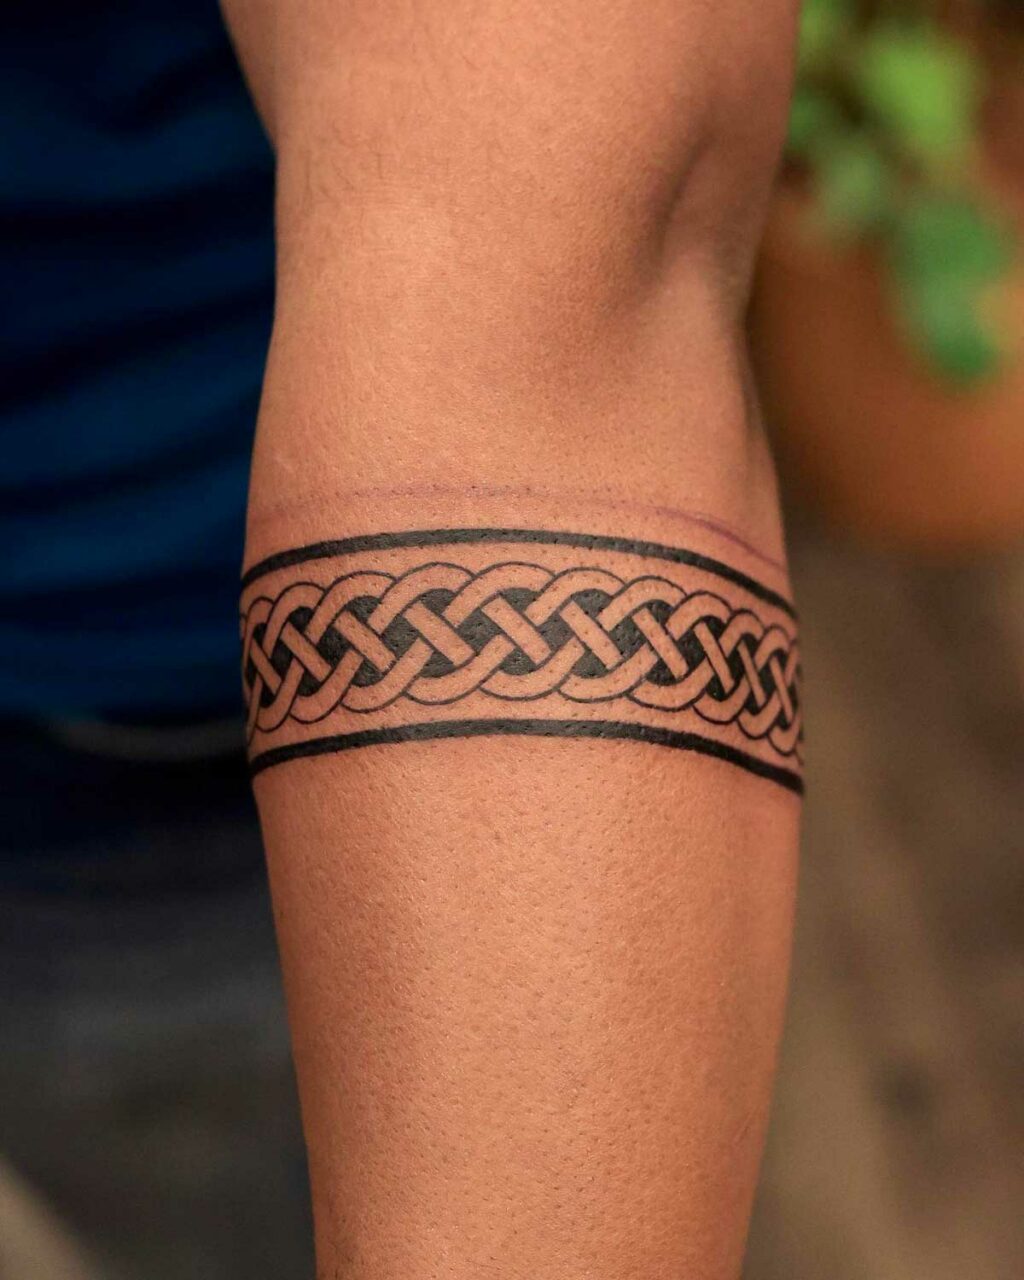 Subtle Ink: Modern Small Tattoo Trends for Men